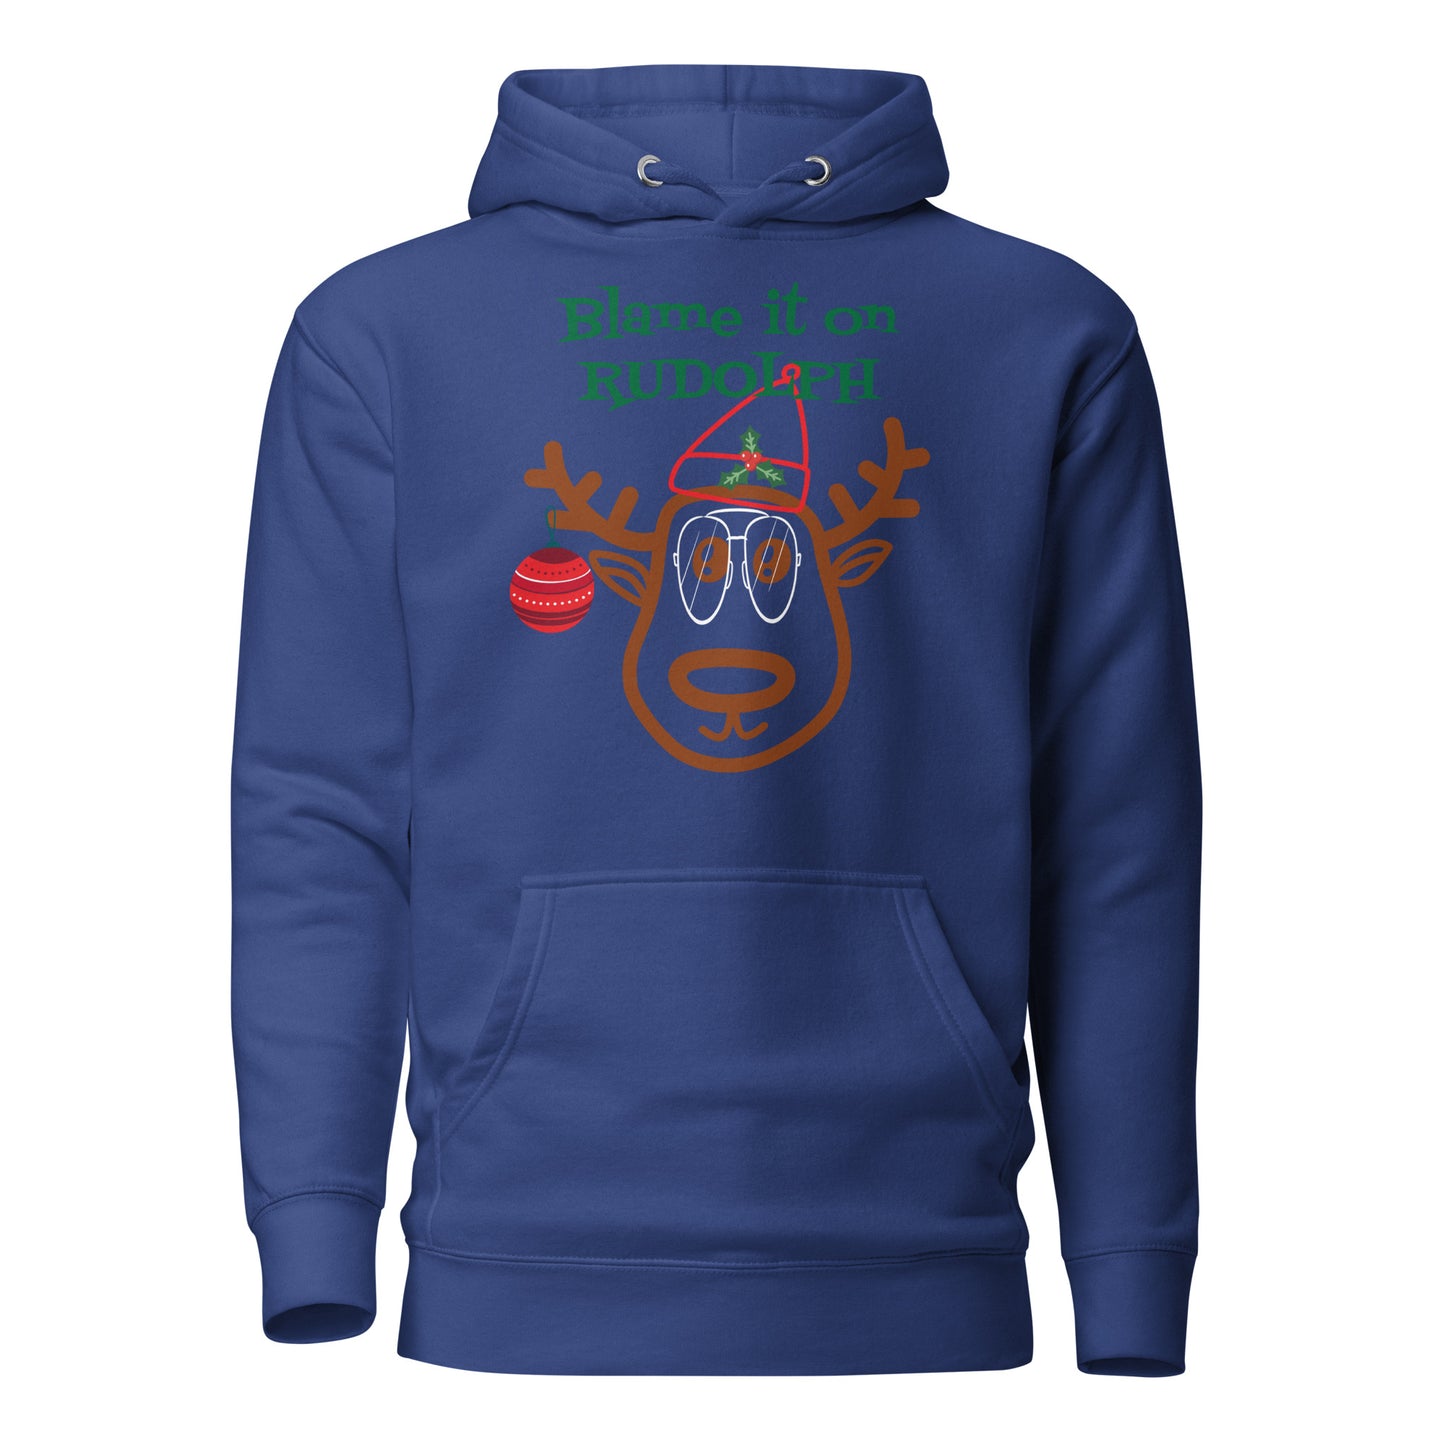 Blame it on RUDOLPH Unisex Hoodie, Christmas Gifts, Christmas Items